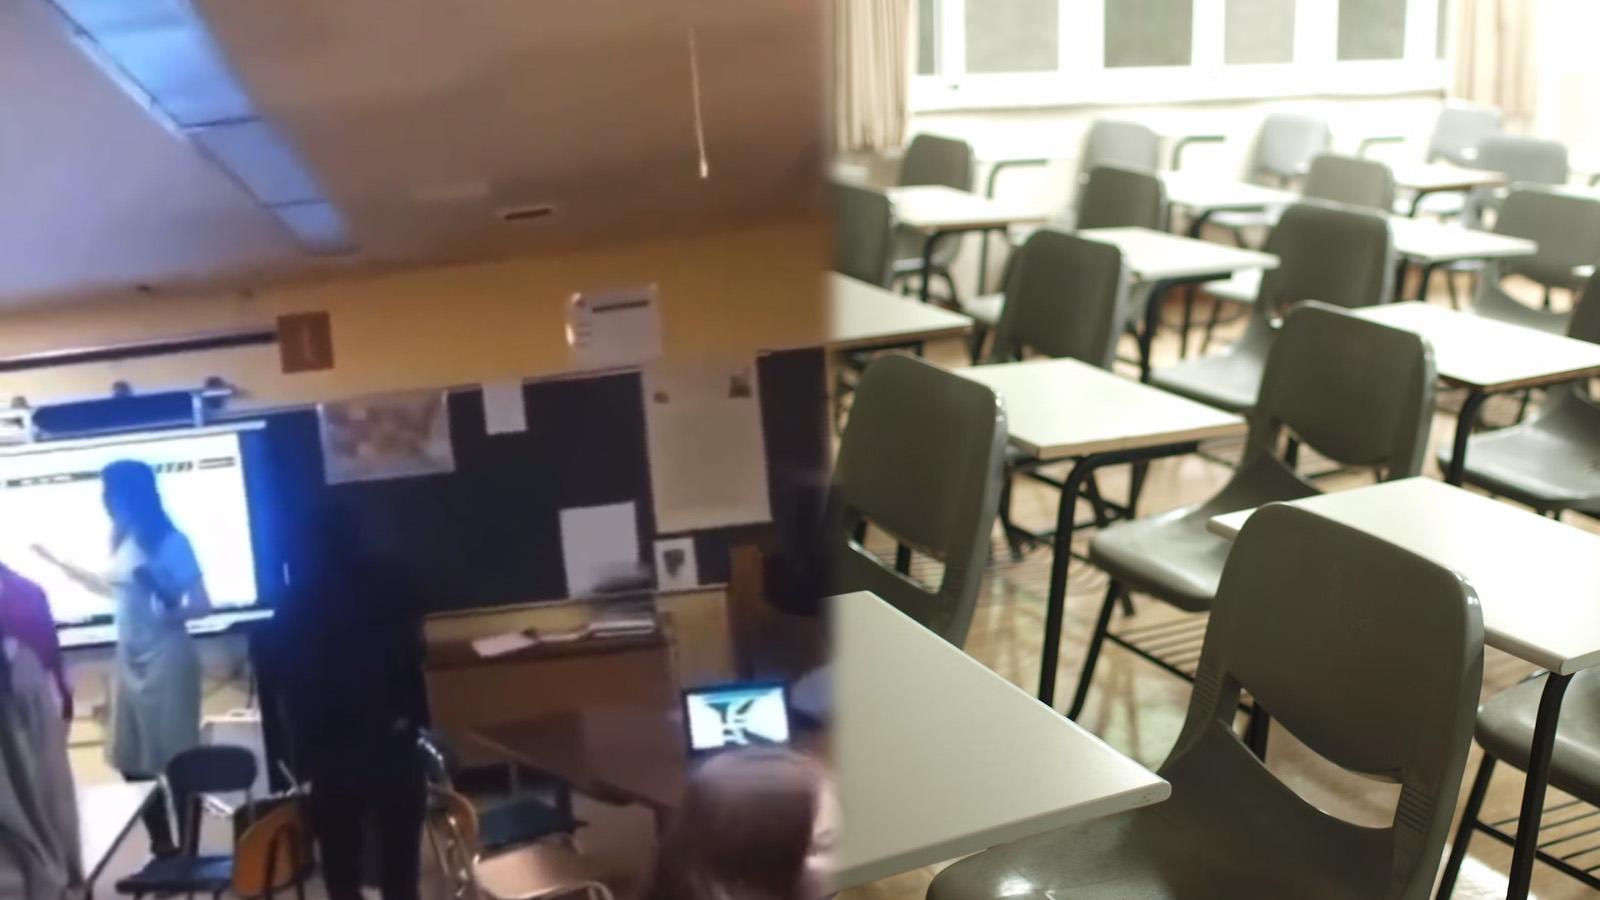 Michigan teacher knocked unconscious after footage shows student throw metal chair